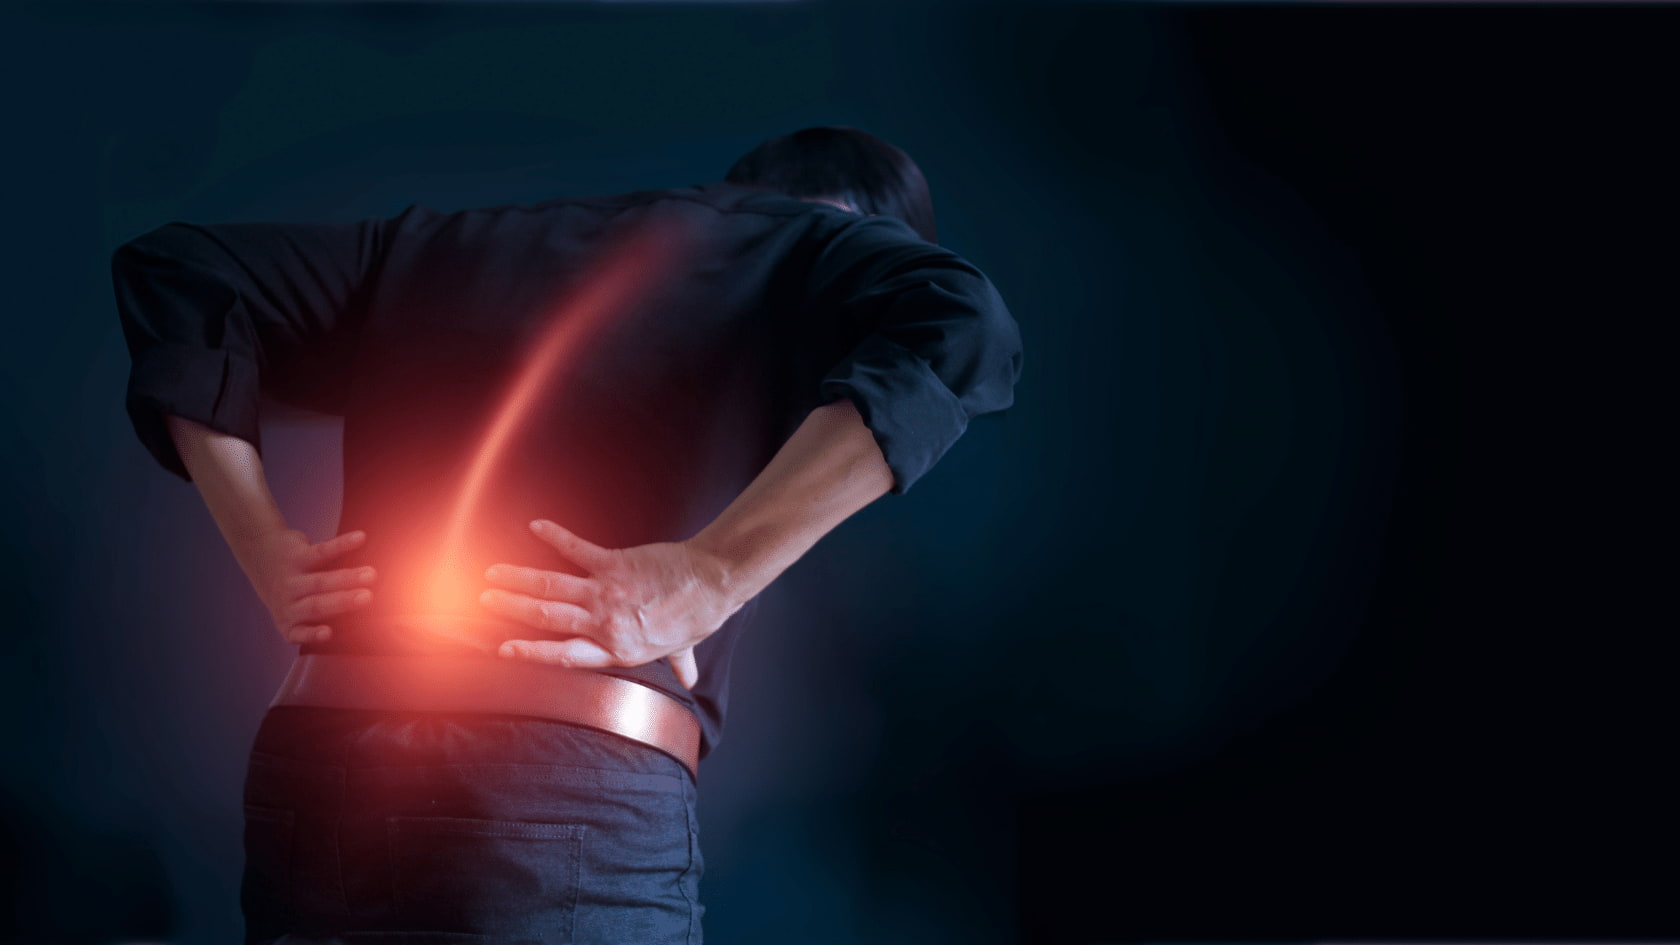 Red Light Therapy for Back Pain